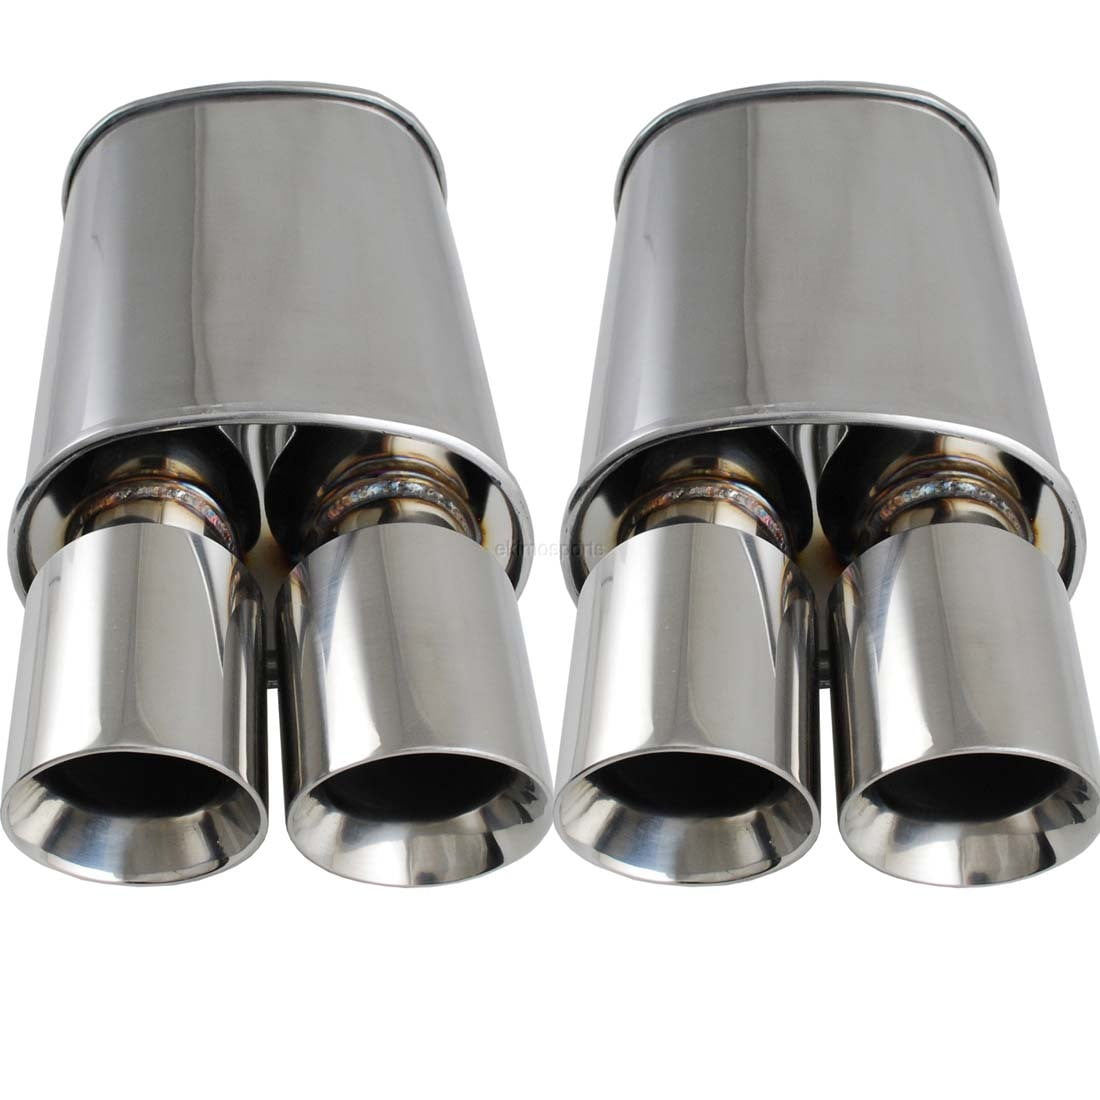 Polished Spun-locked Exhaust Oval Muffler Double Wall 3.5/" Slant Tip for Ford